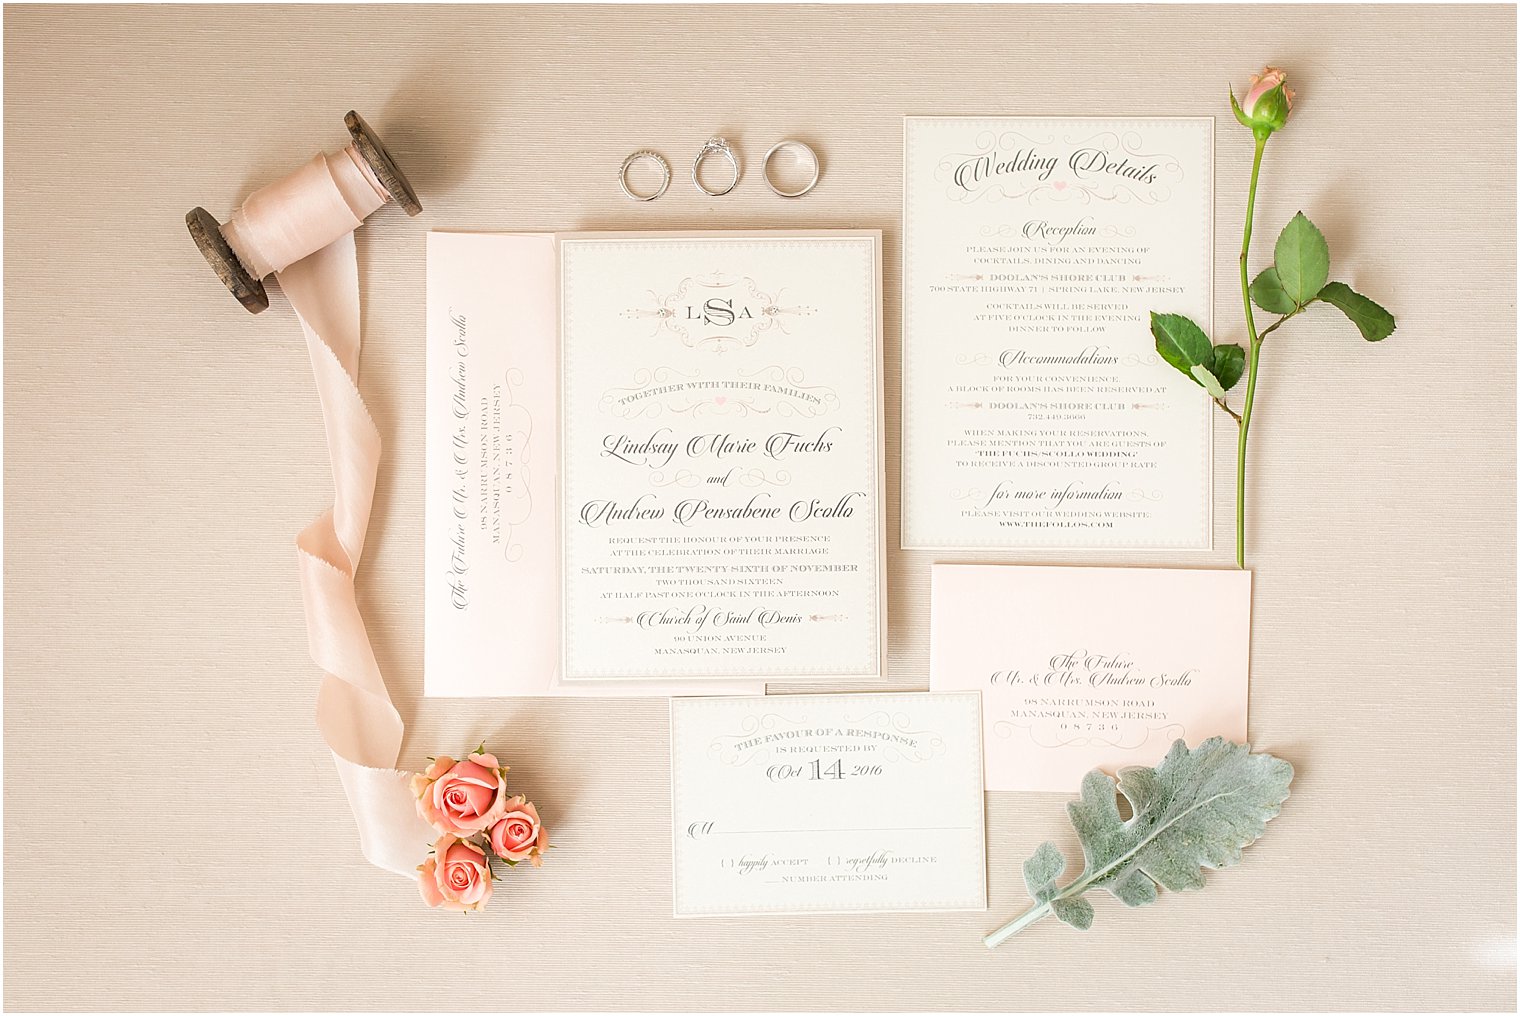 Invitations by Holland Designs | Florals by Bogath Weddings and Events